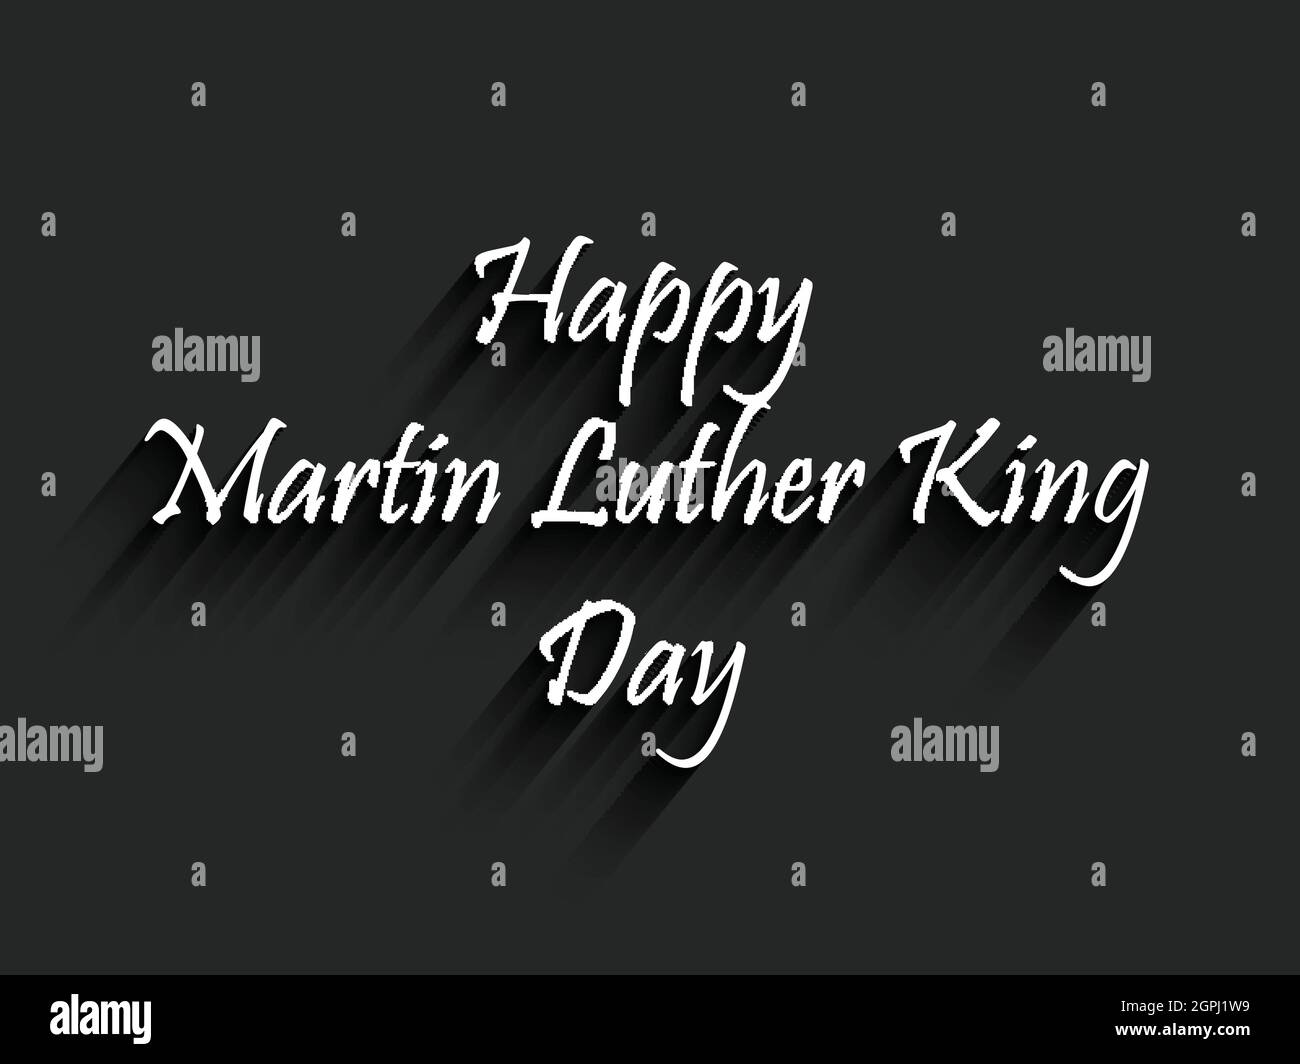 Martin Luther King Day Stock Vector